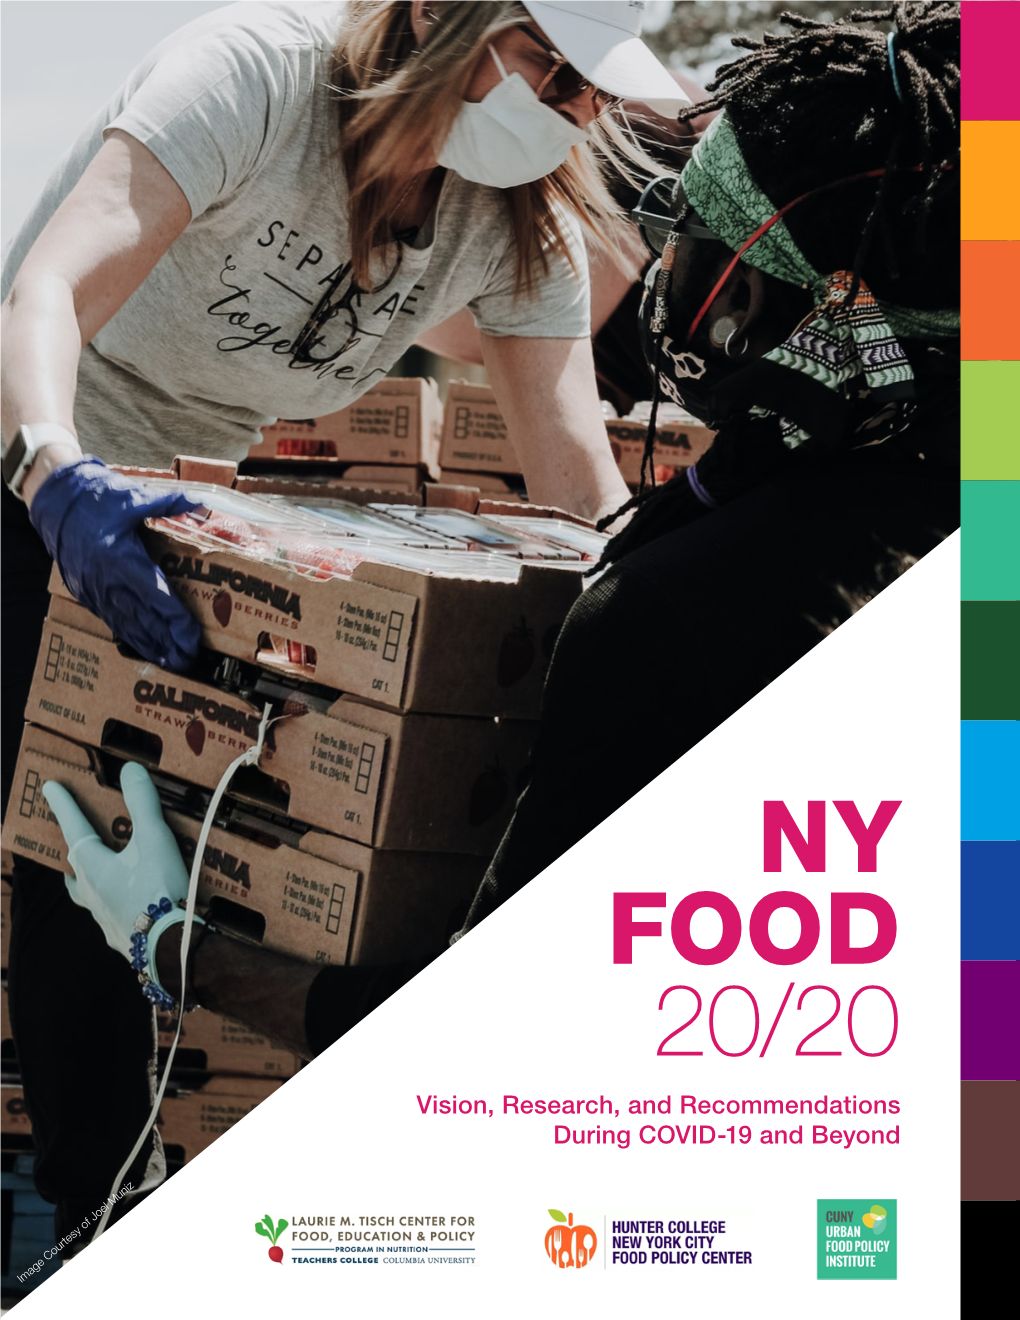 NY FOOD 20/20 Vision, Research, and Recommendations During COVID-19 and Beyond